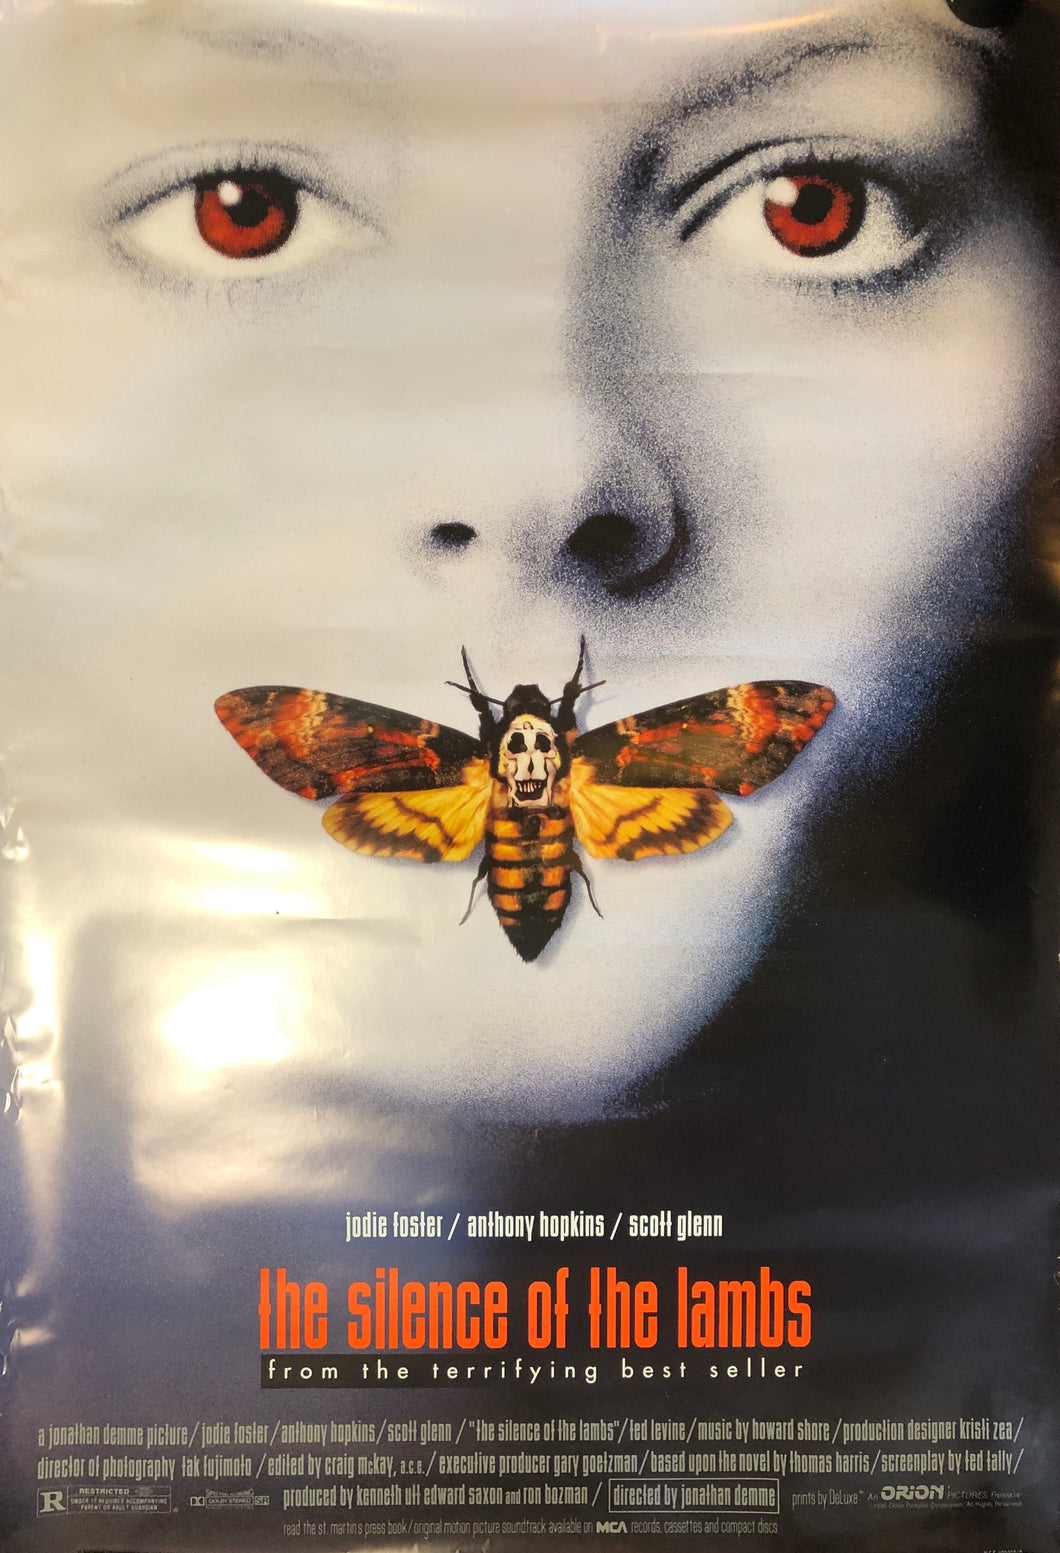 SILENCE OF THE LAMBS (1) - (USED) MOVIE POSTER